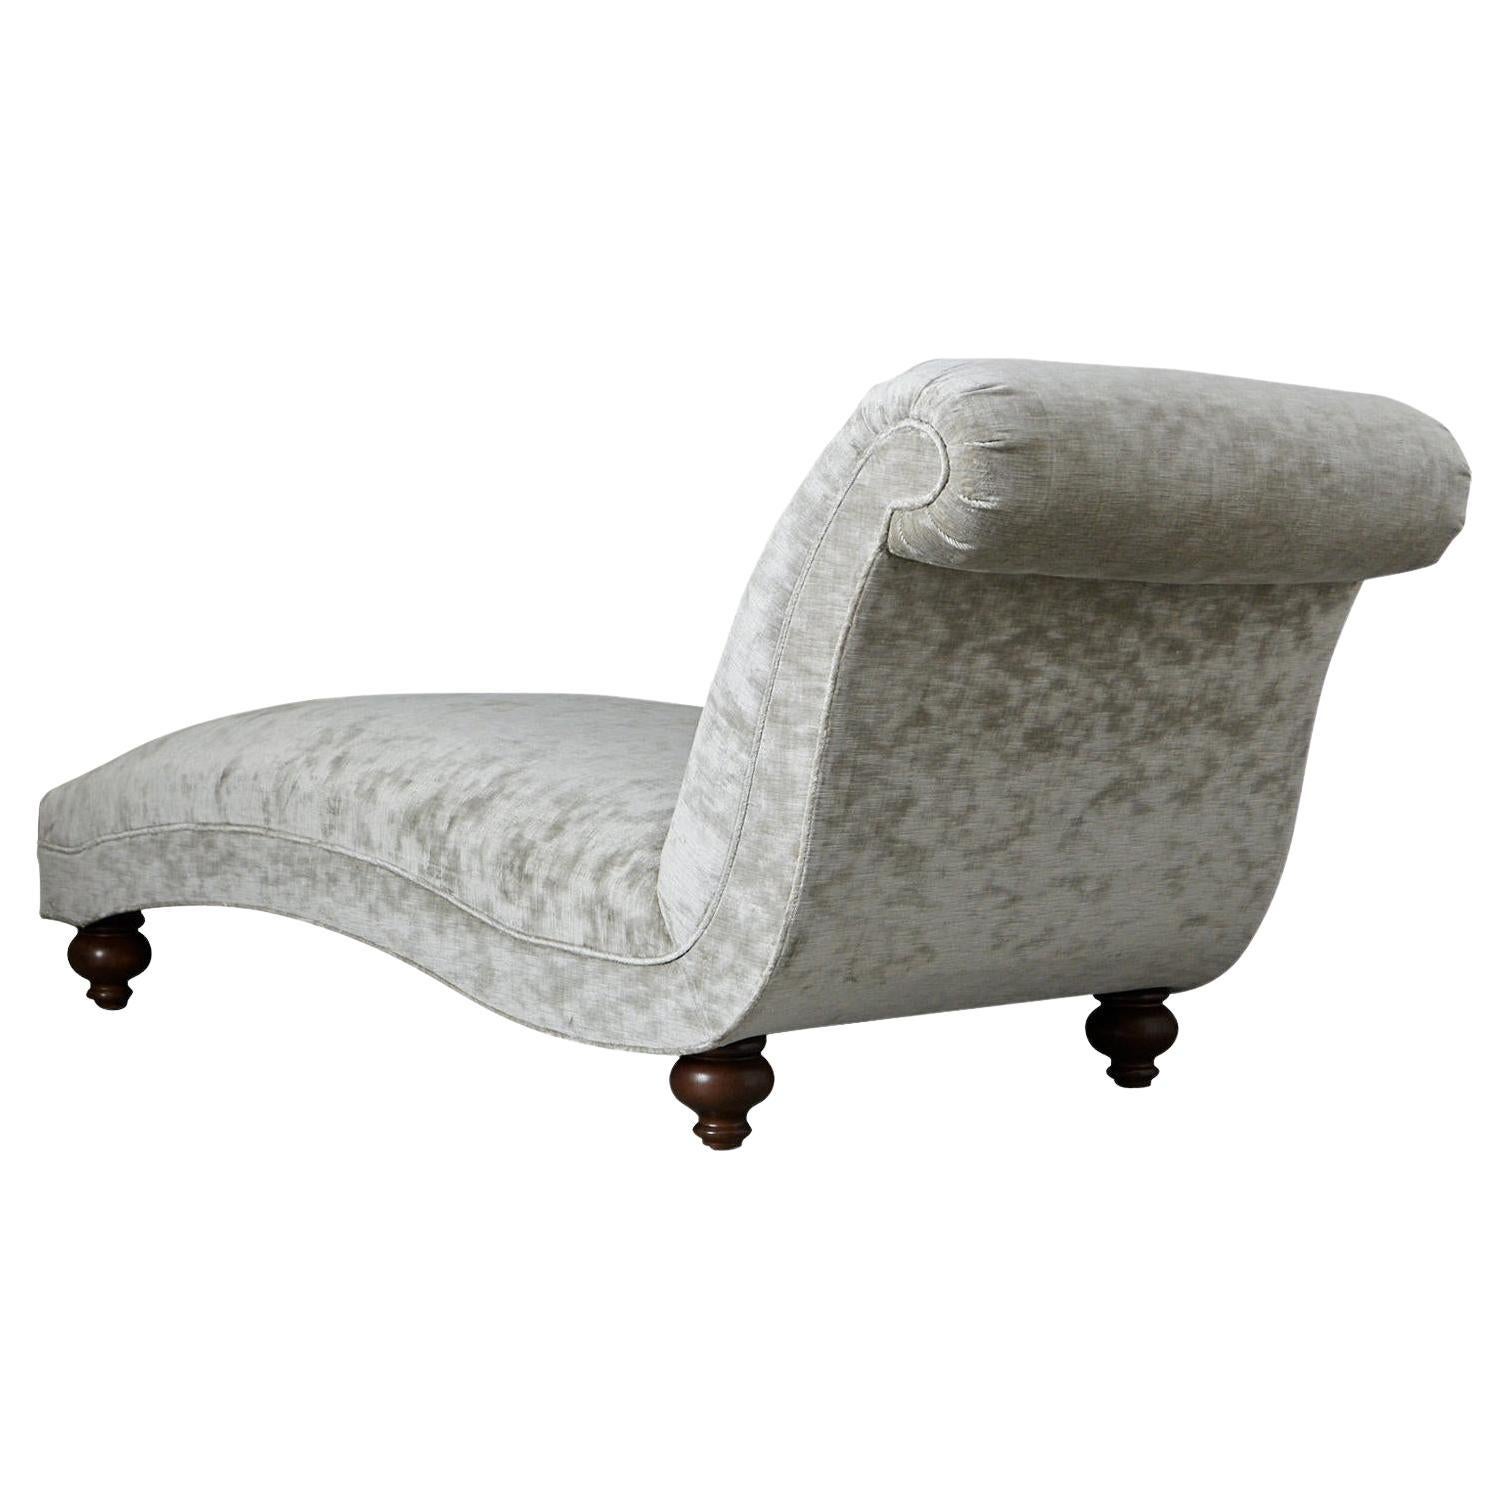 French Chaise Longue with New Upholstery in Striae Velvet, circa 1930s